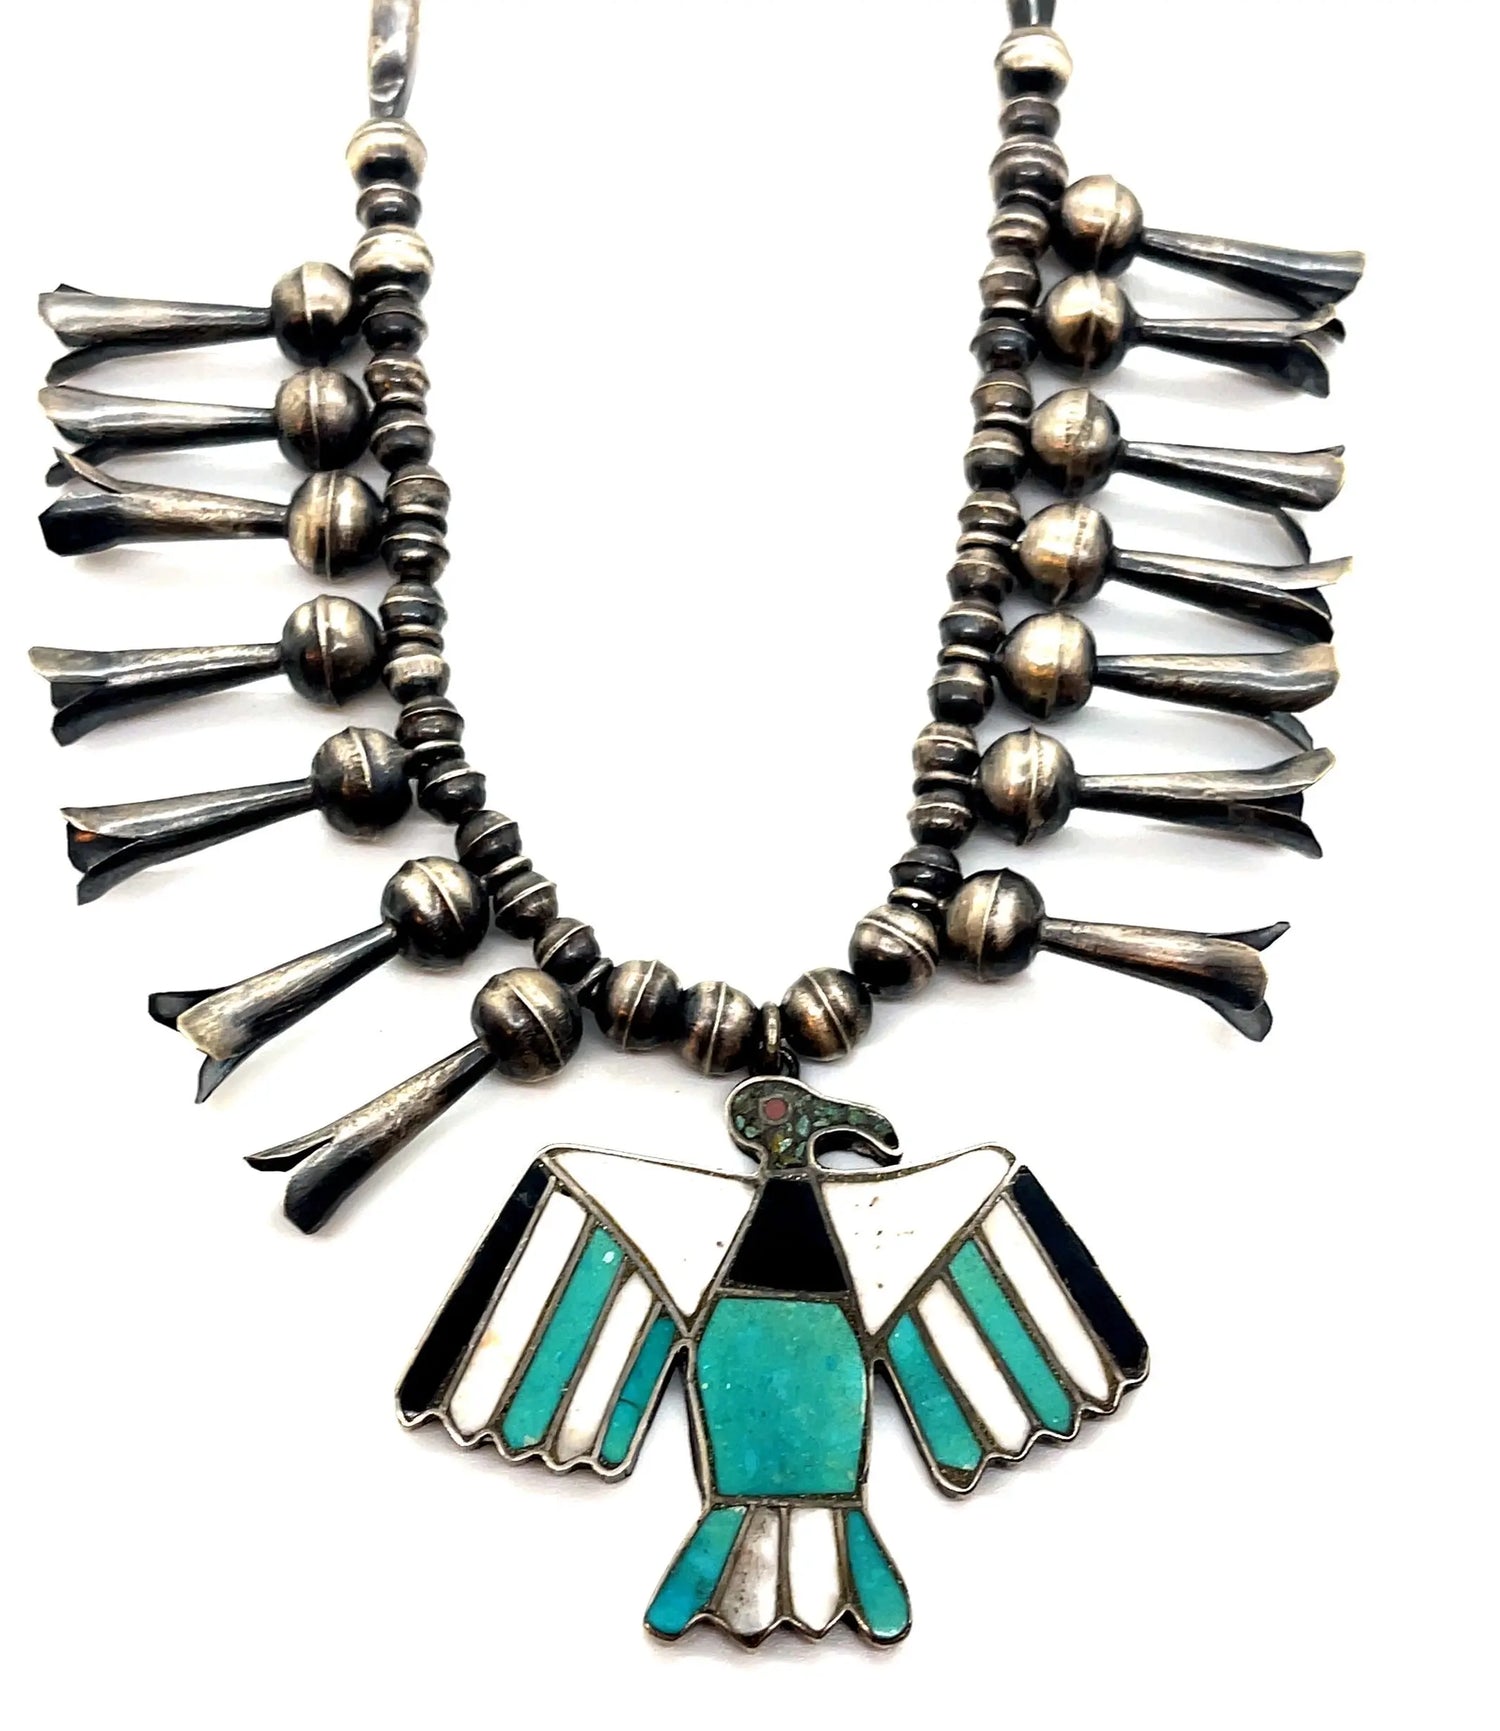 Vintage 1960s Zuni Thunderbird Turquoise Squash Blossom Necklace  Number of flowers 14  Material: Sterling Silver, Turquoise and Mother of Pearl Inlay  Length around the necklace is 22 inches and the Naja is 2.5 inches long  Good Vintage Condition  Note - Please bear in mind that you are purchasing vintage, it might not be perfect but it will be authentic.